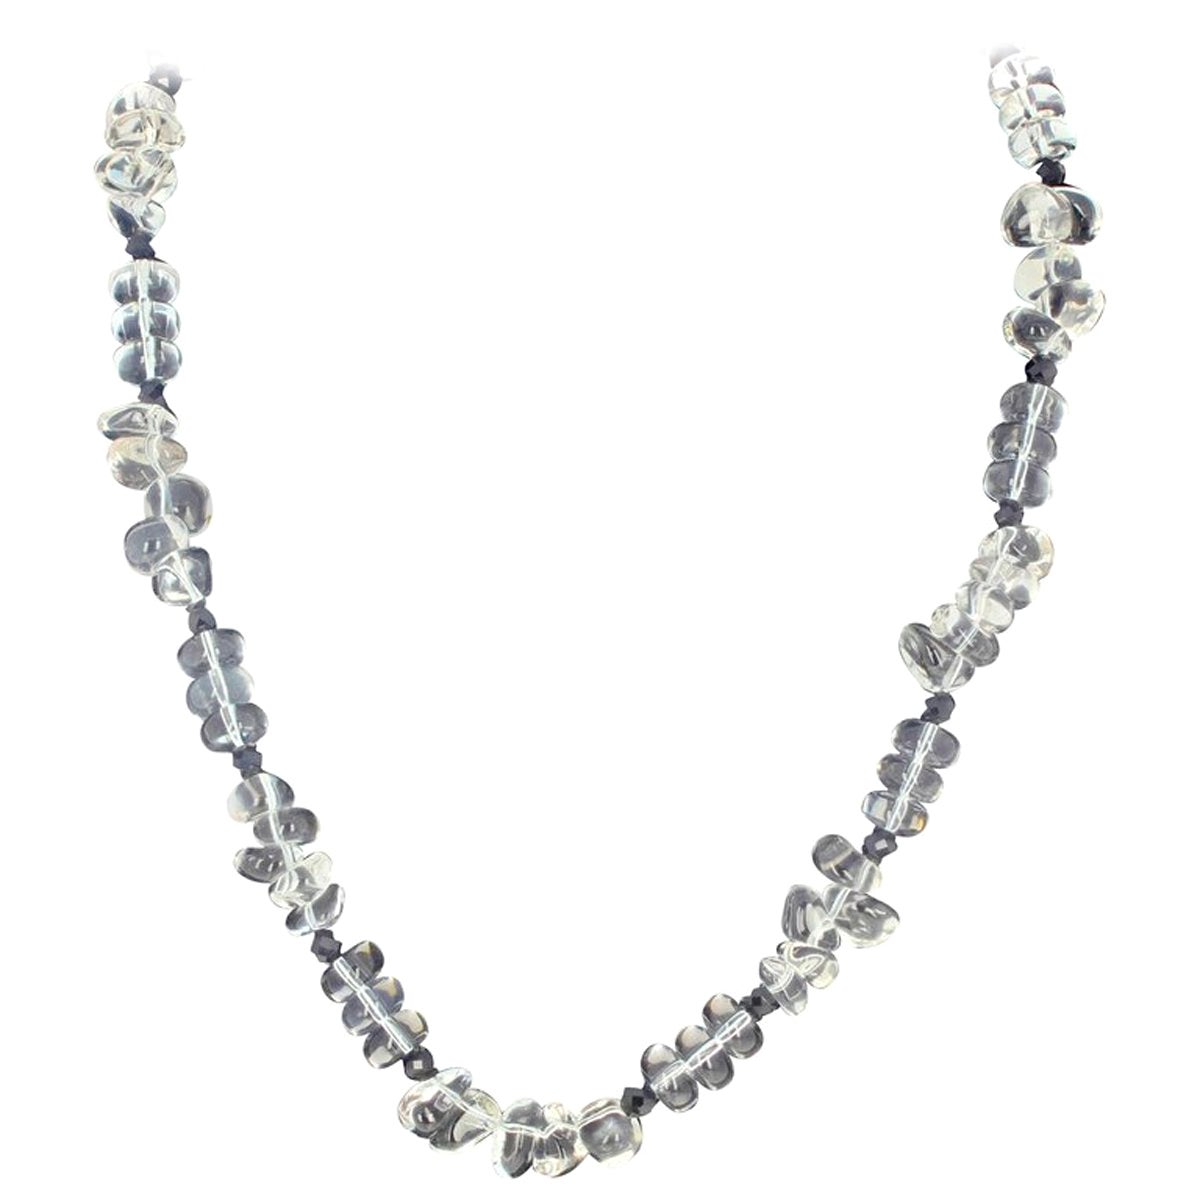 This beautiful 17.5 inches long natural Quartz necklace is enhanced with glittering gem cut black Spinel and set with a darkened sterling silver diamond encrusted hook clasp.  The flip-flop of the gemstones makes it show off romantically.  It